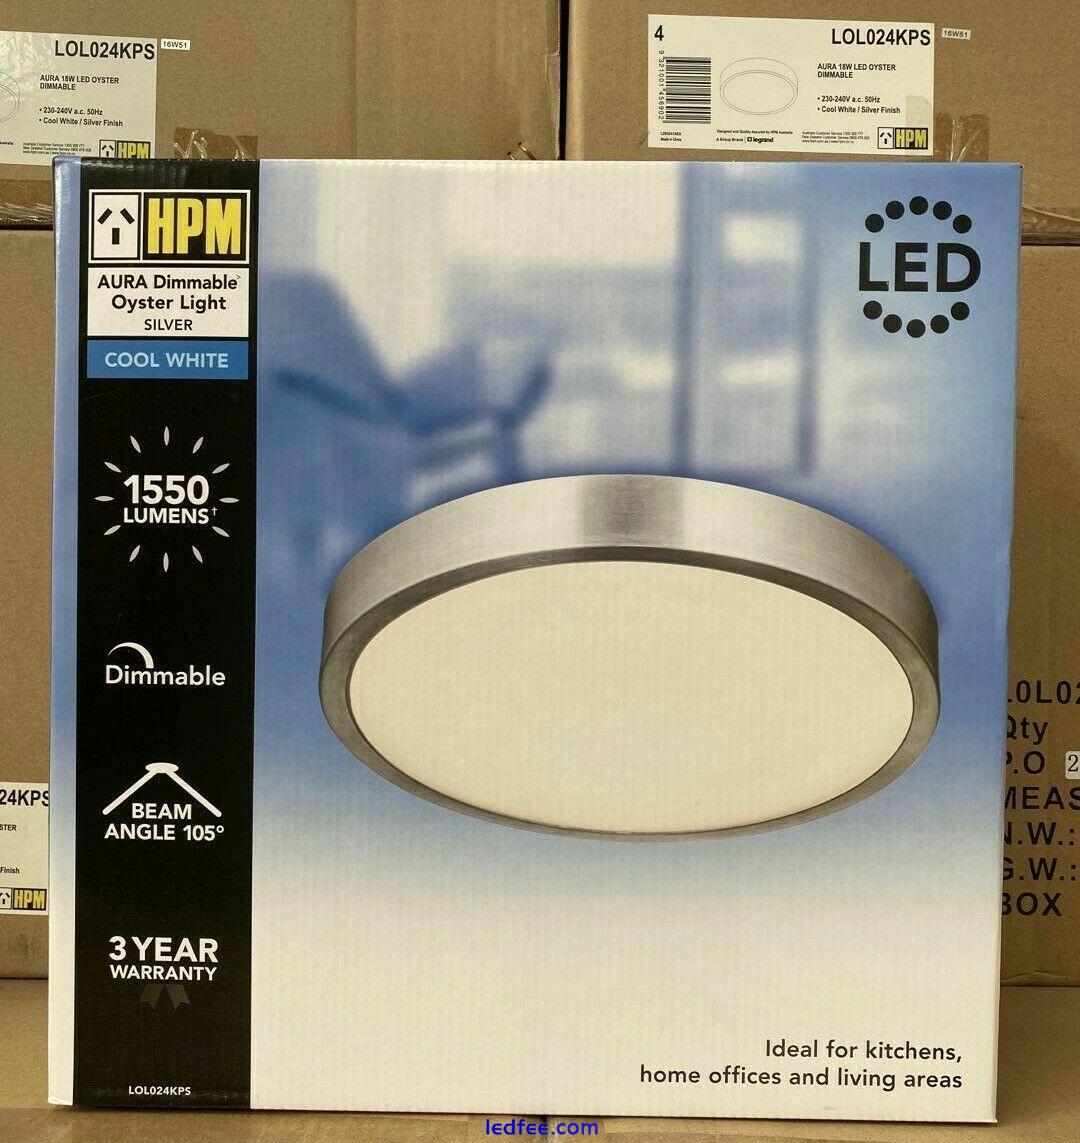 HPM LED Dimmable Ceiling Oyster Light NEW 2 